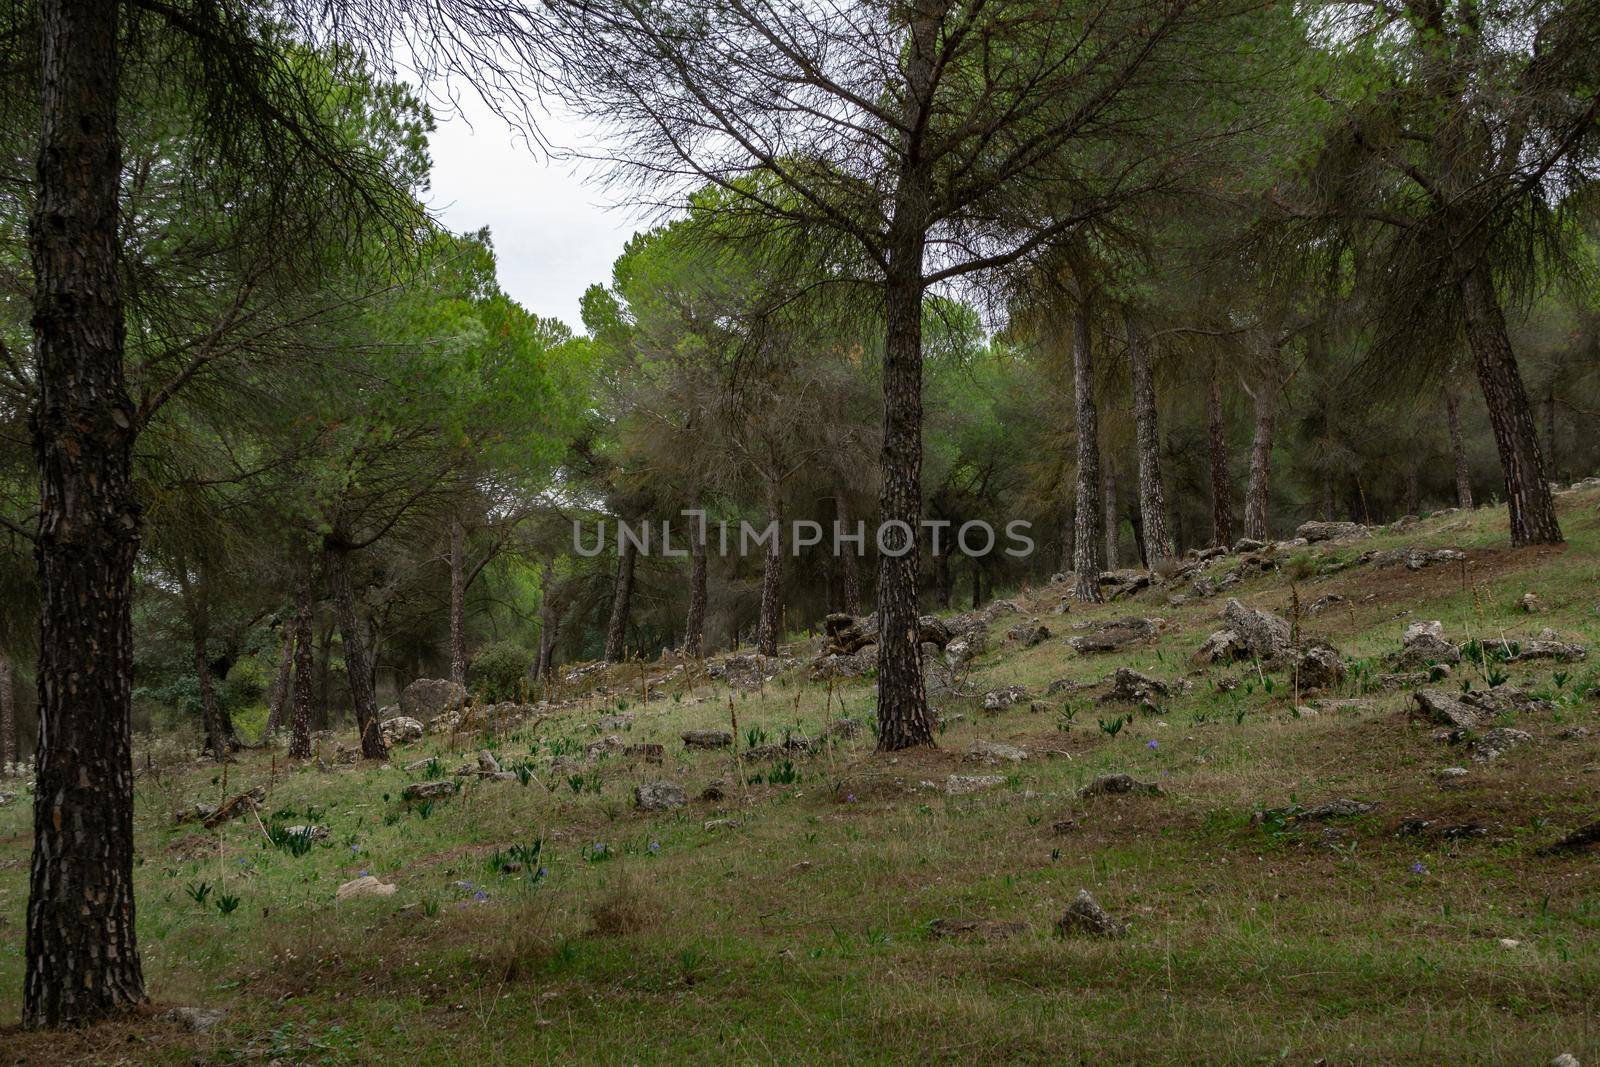 landscape of a pine forest in southern spain with grass and rocks on the ground